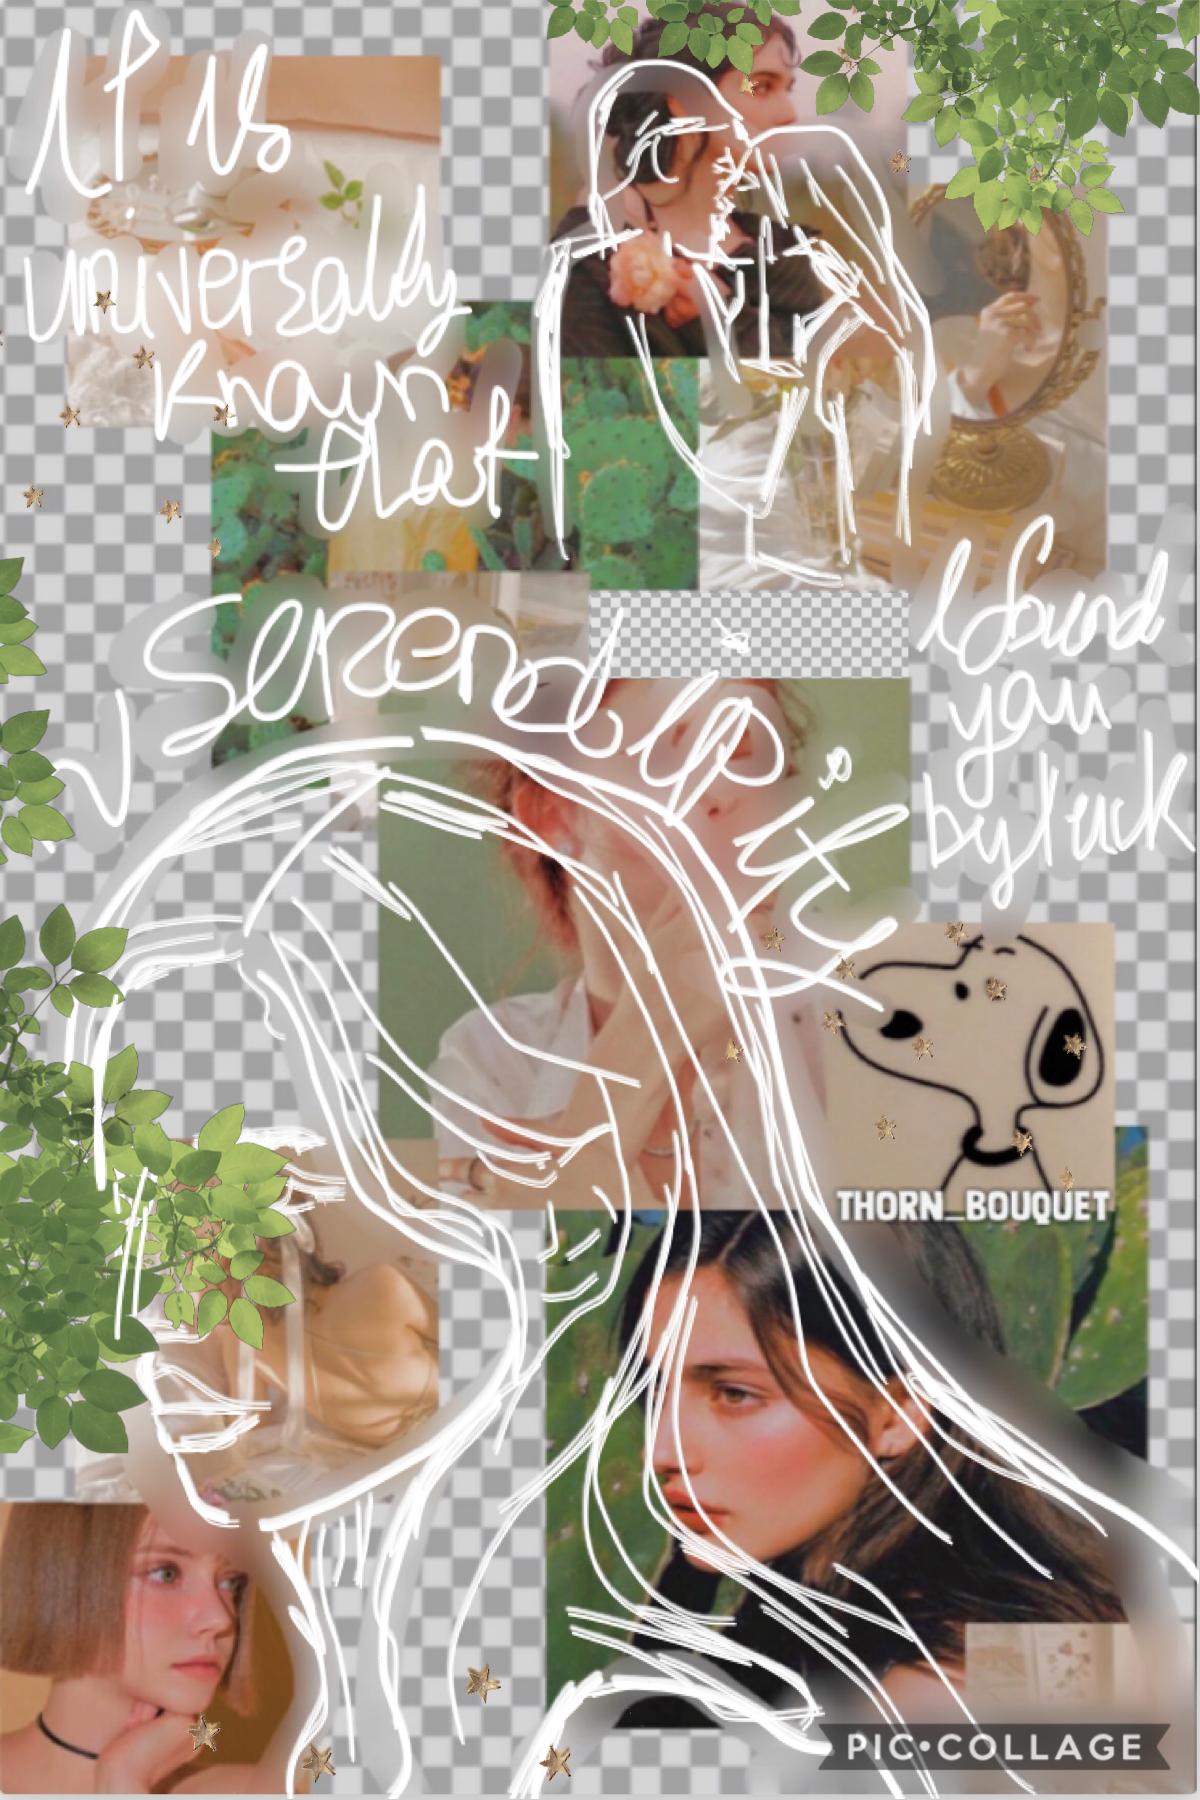 tappity tap 🤭🍃

I got this effect by accident when I was doing the layers and re-editing them 👏🏻 
QOTD: favourite word so far?
lol I change frequently and rn my best would be ‘vulnerable’ 🥺 oh and the song vulnerable by Selena is omggg so good 🥰